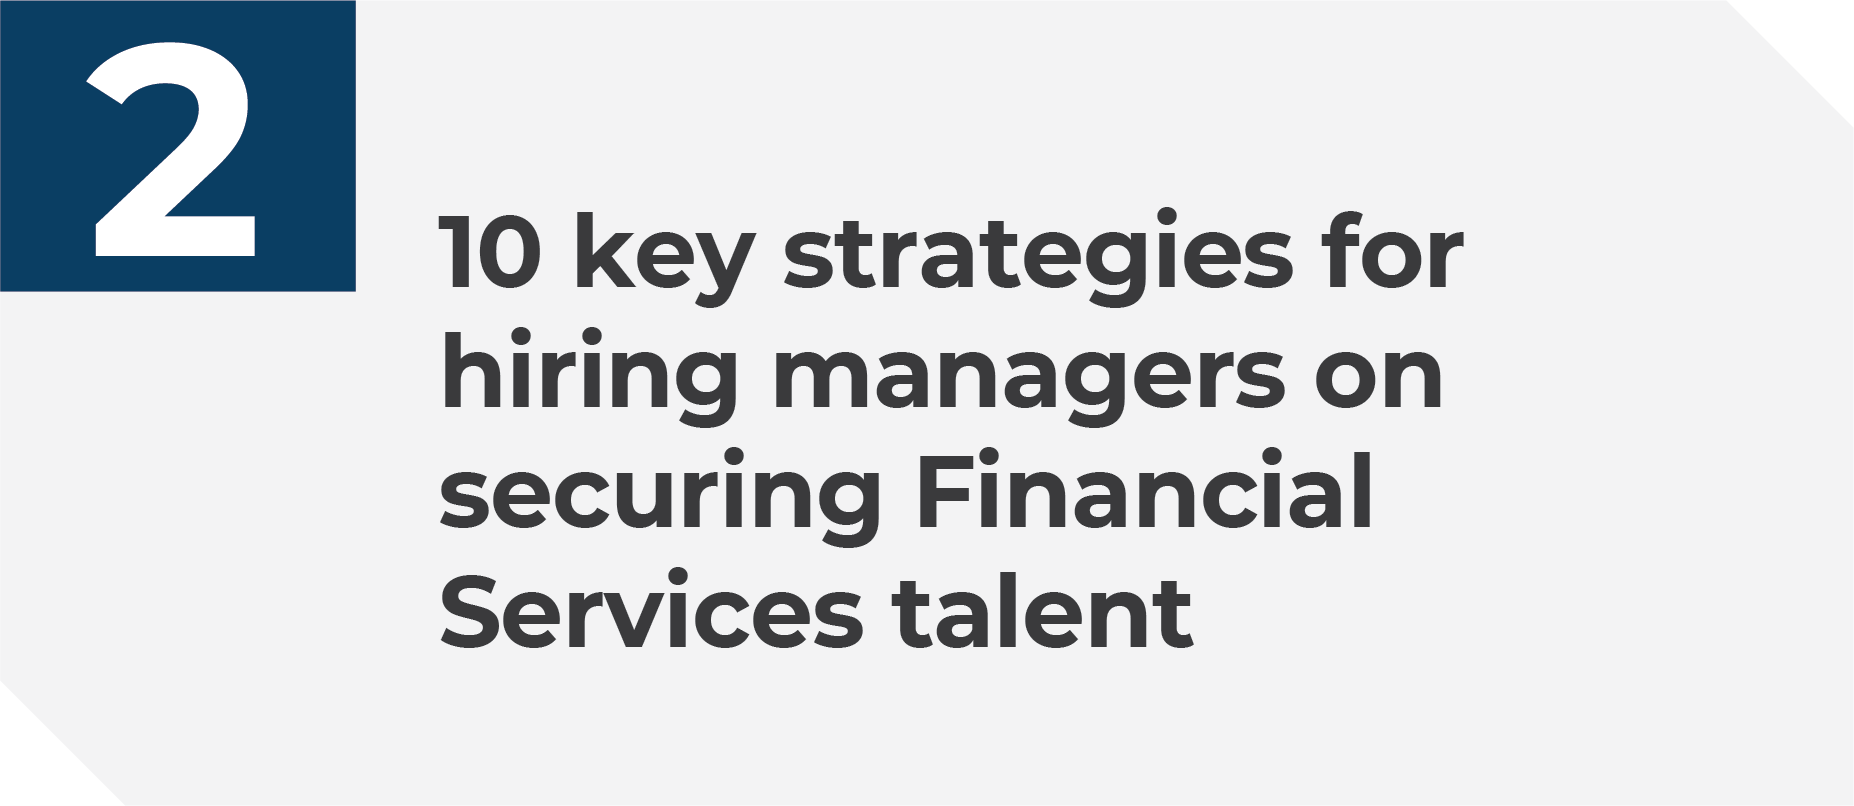 10 key strategies for hiring managers on securing Financial Services talent